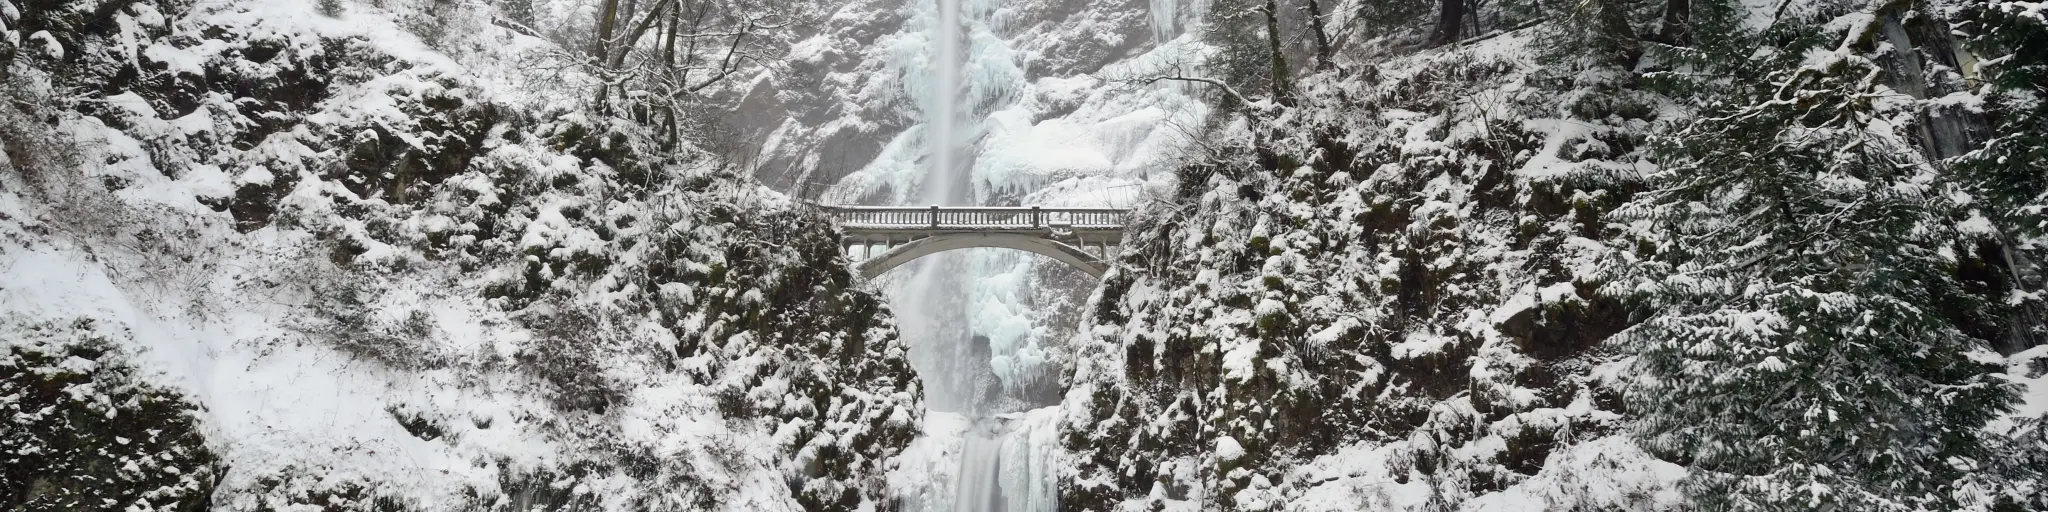 Frozen waterfall with a beautiful bridge on a winter day with snow on the ground